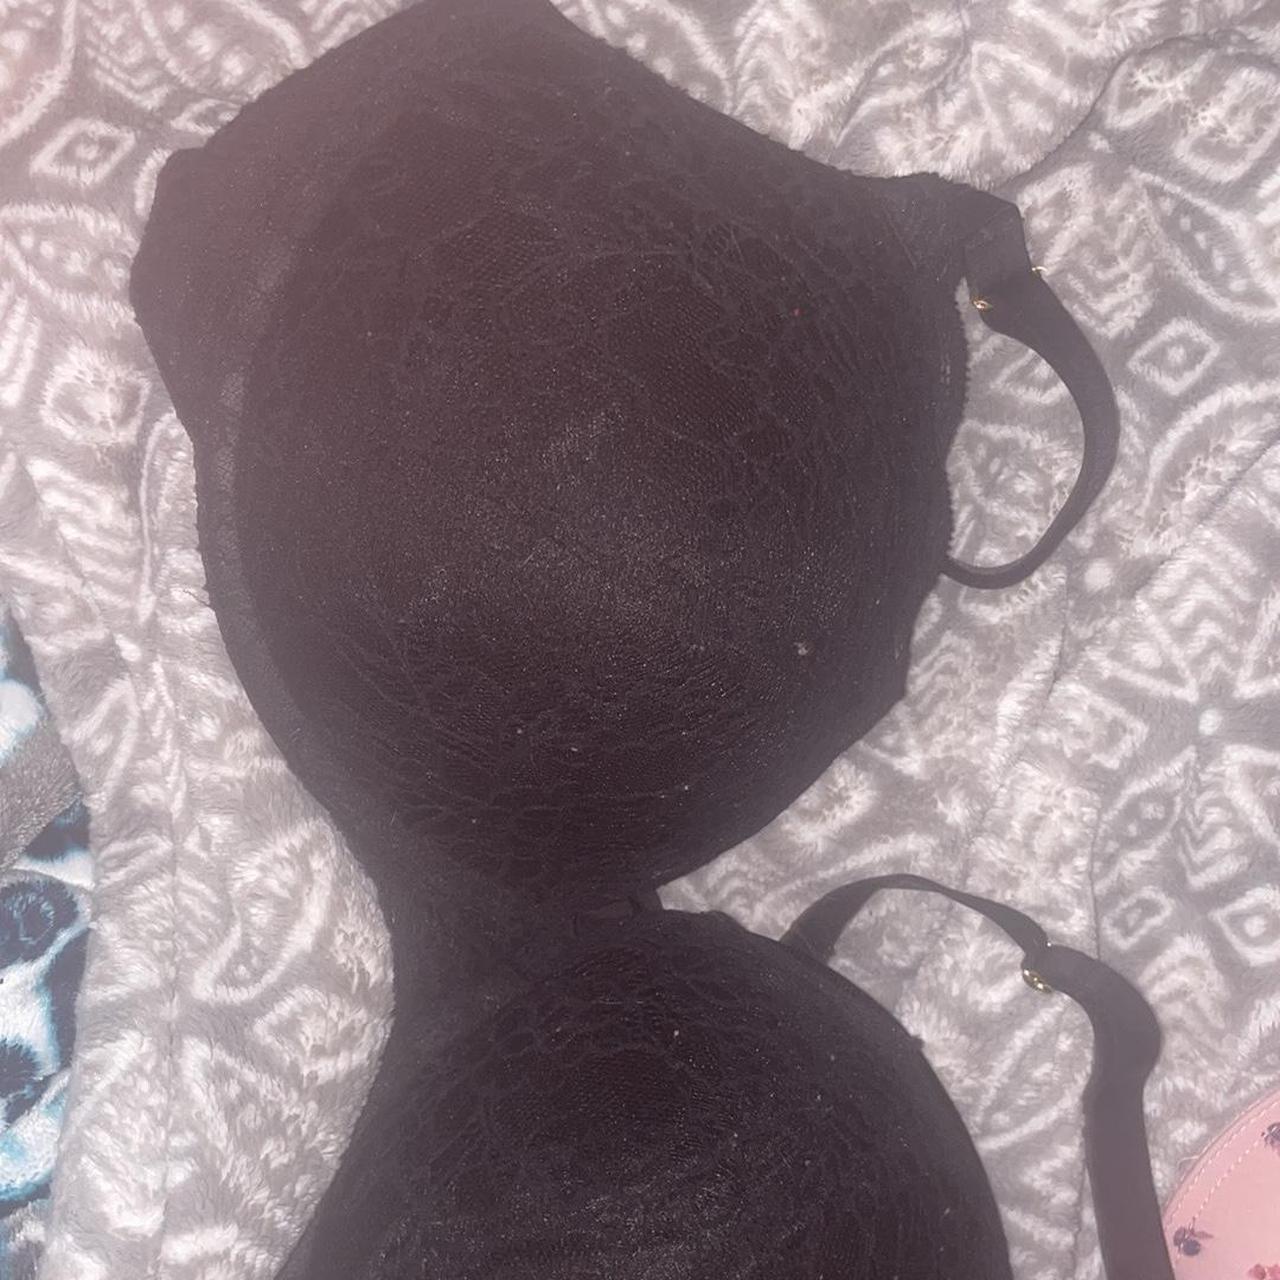 Lot of four NEW wonder nation bras All are NEW and - Depop